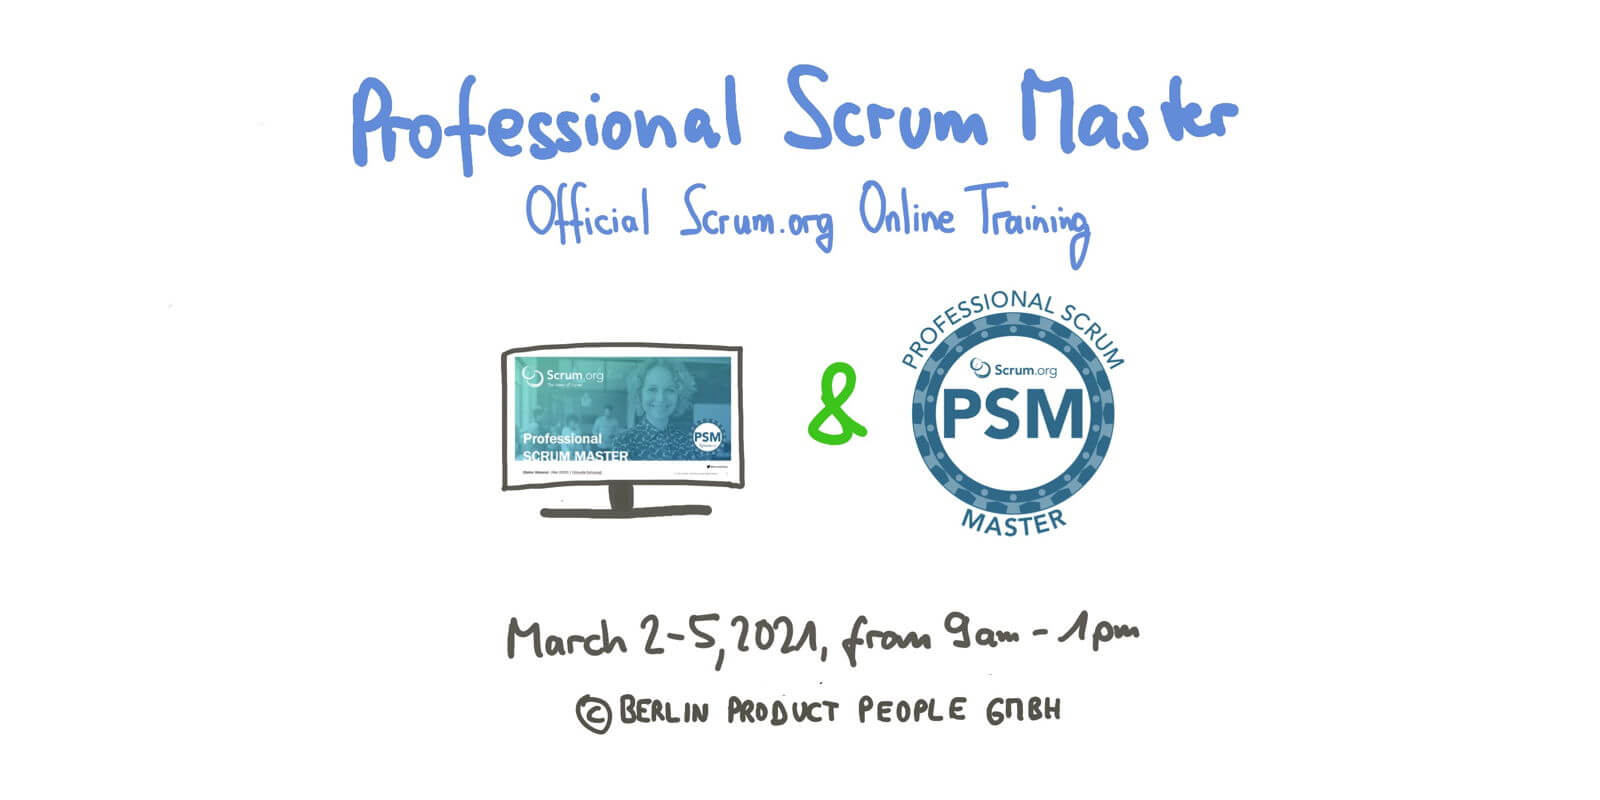 🖥 🇬🇧 Professional Scrum Master Online Training w/ PSM I Certificate — March 2-5, 2021